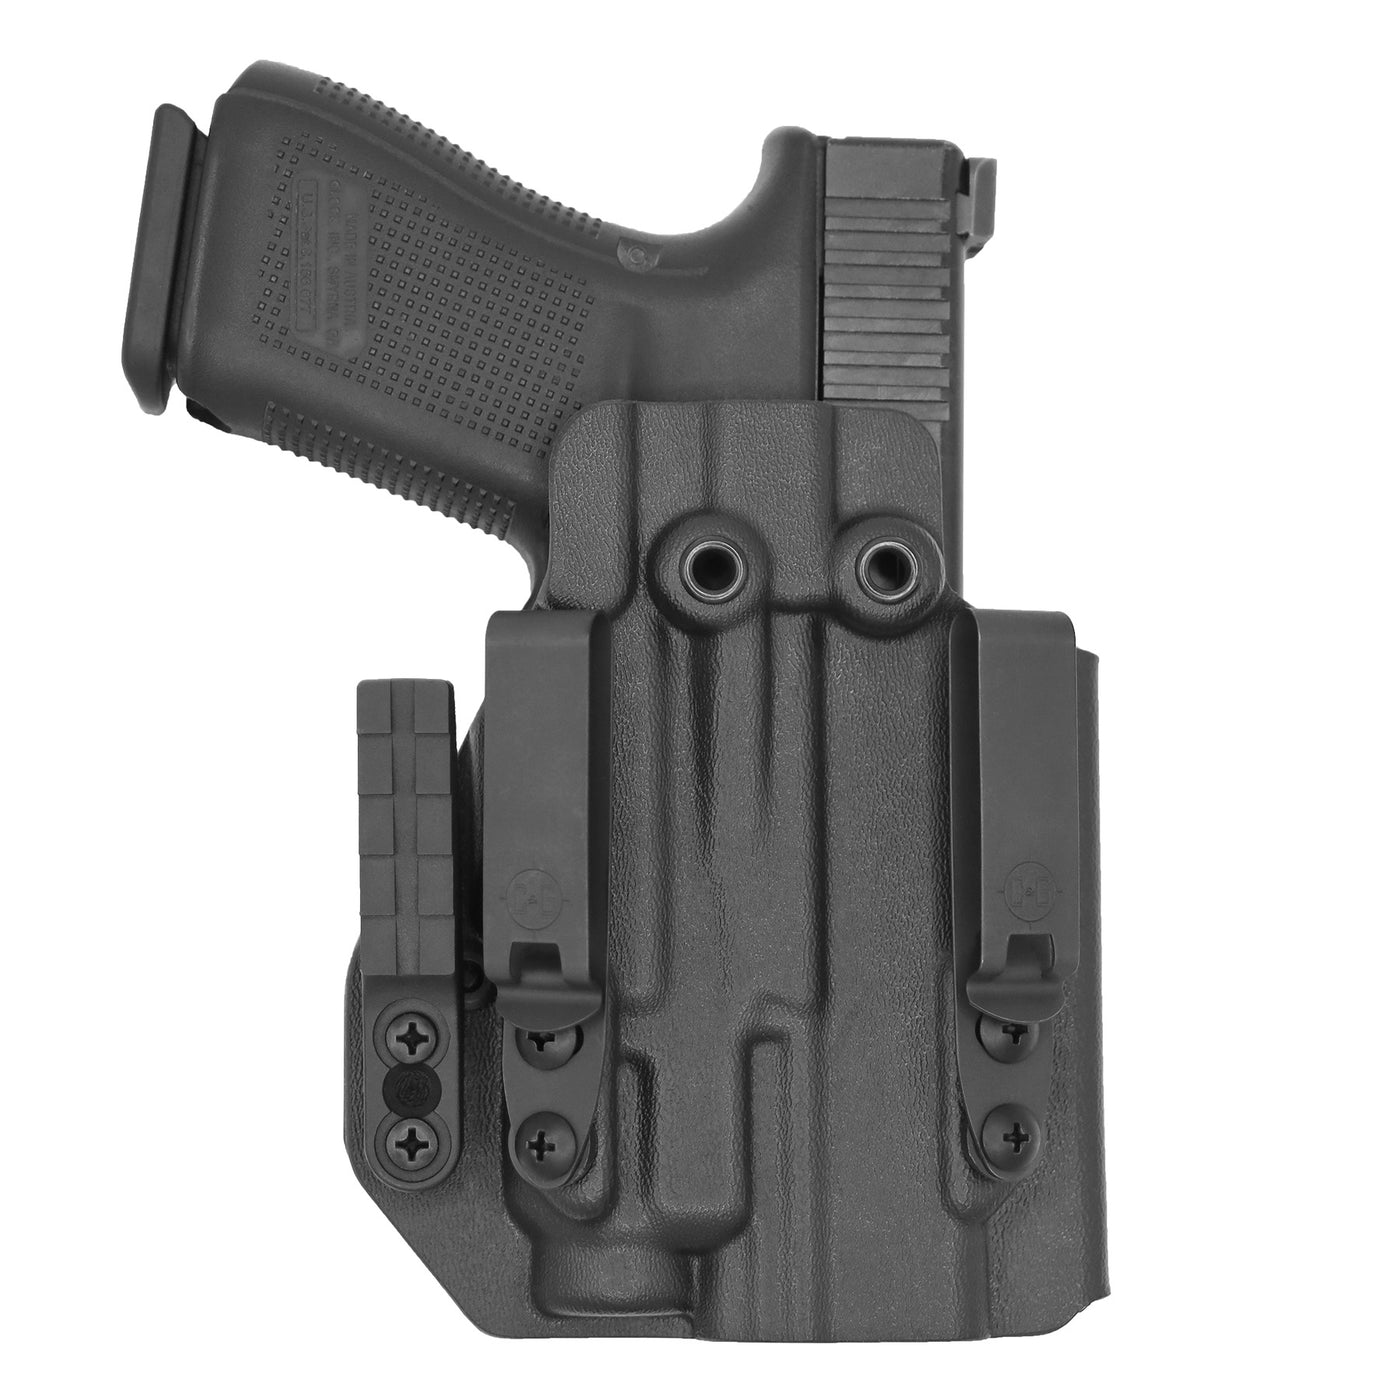 C&G Holsters custom IWB ALPHA UPGRADE Tactical Glock 29/30 streamlight TLR7/a in holstered position